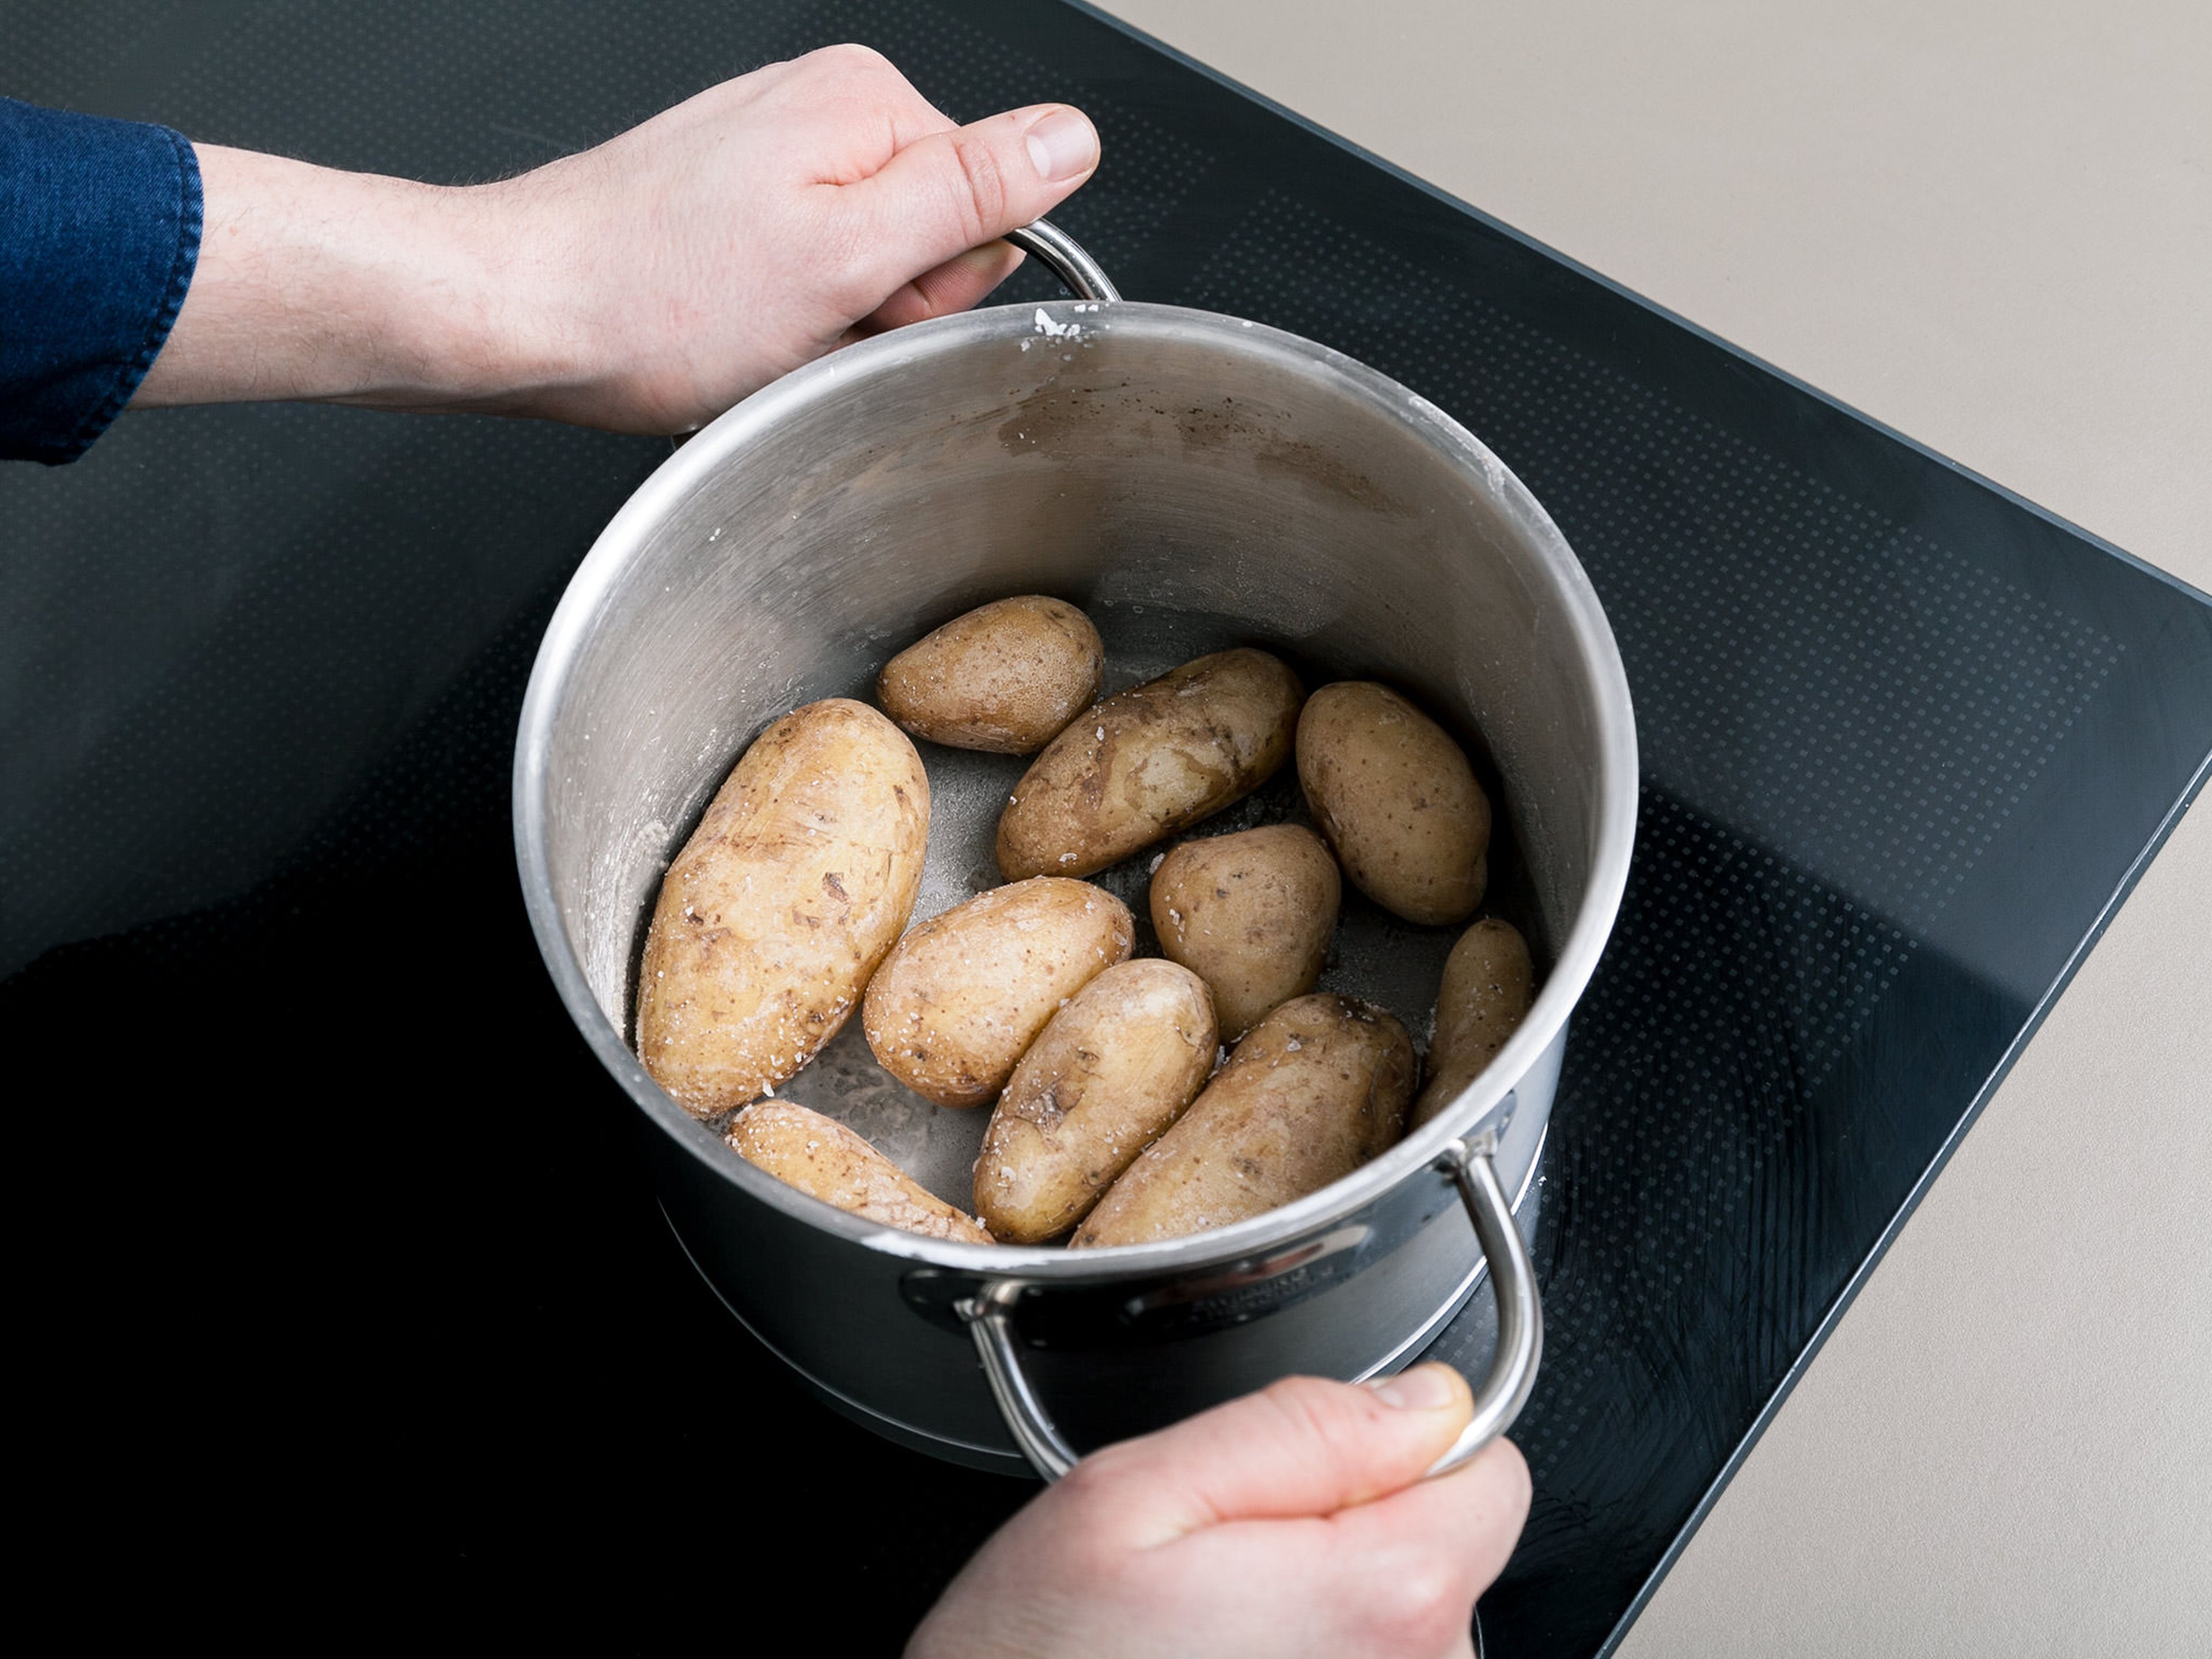 Pour out the water in the pot until there is still a bit left. Without the lid, heat the potatoes over medium-low heat until the water evaporates and shake the pot from time to time. This is to ensure that the potatoes get the typical wrinkled salt crust.